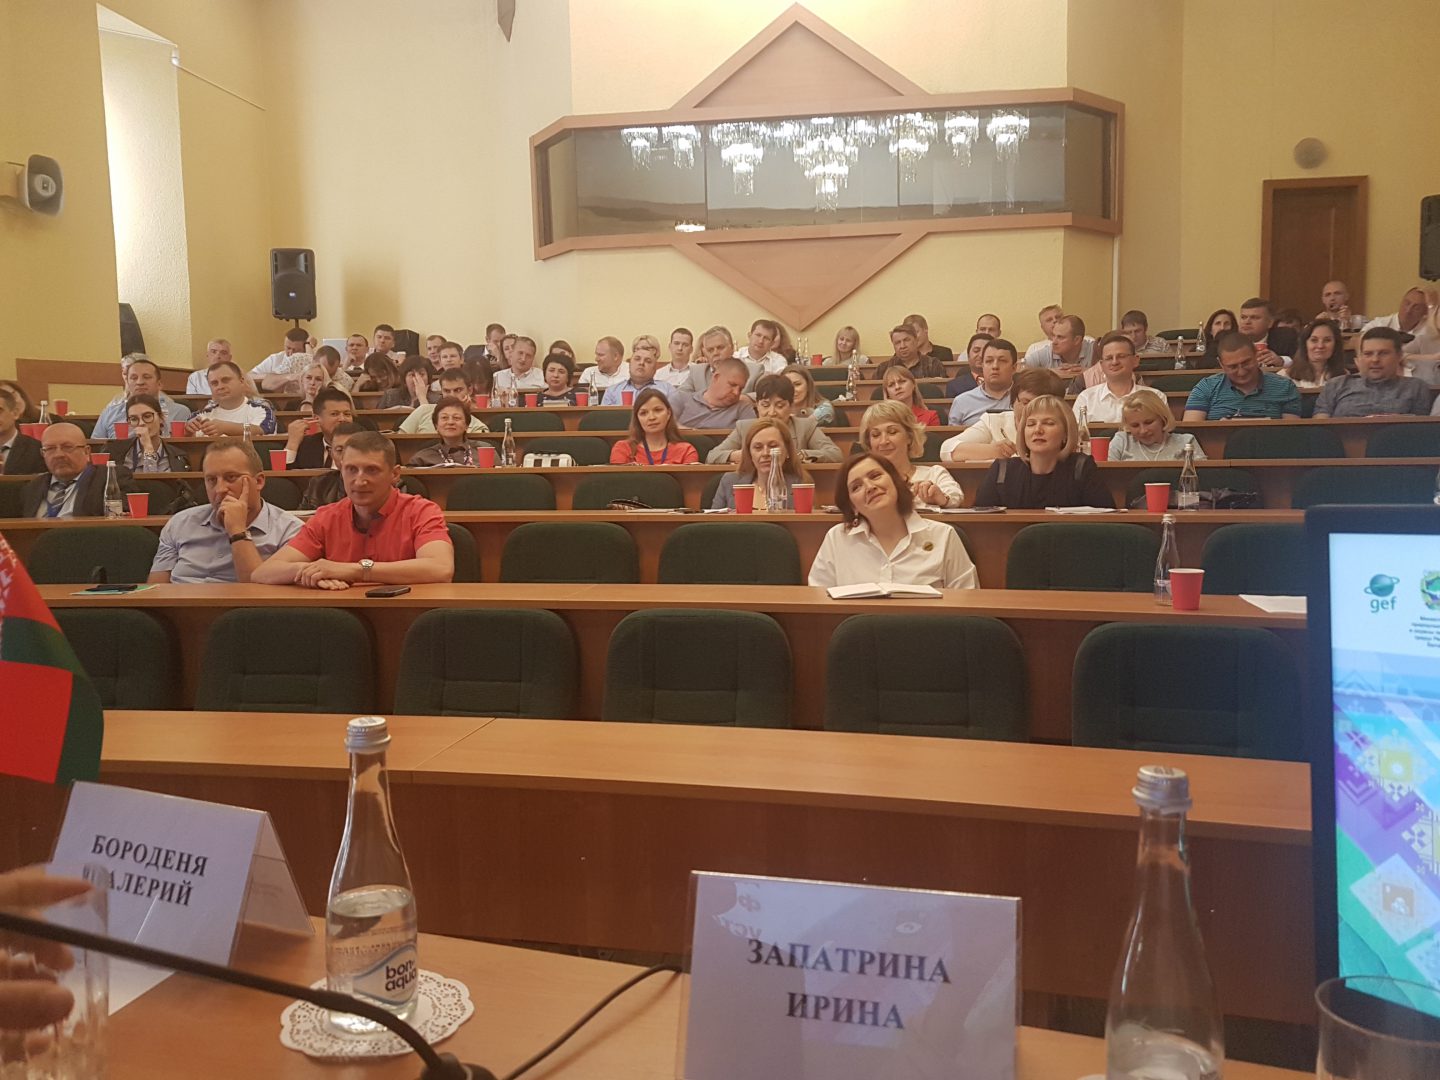 On May 23, 2019 prof. I. Zapatrina has made a presentation “Financing for transformation of cities into “smart and sustainable” at the conference “Towards the implementation of the Sustainable development Agenda for the period up to 2030: housing management, energy efficiency of buildings and sustainable urban development”, which was held in Minsk, Belarus